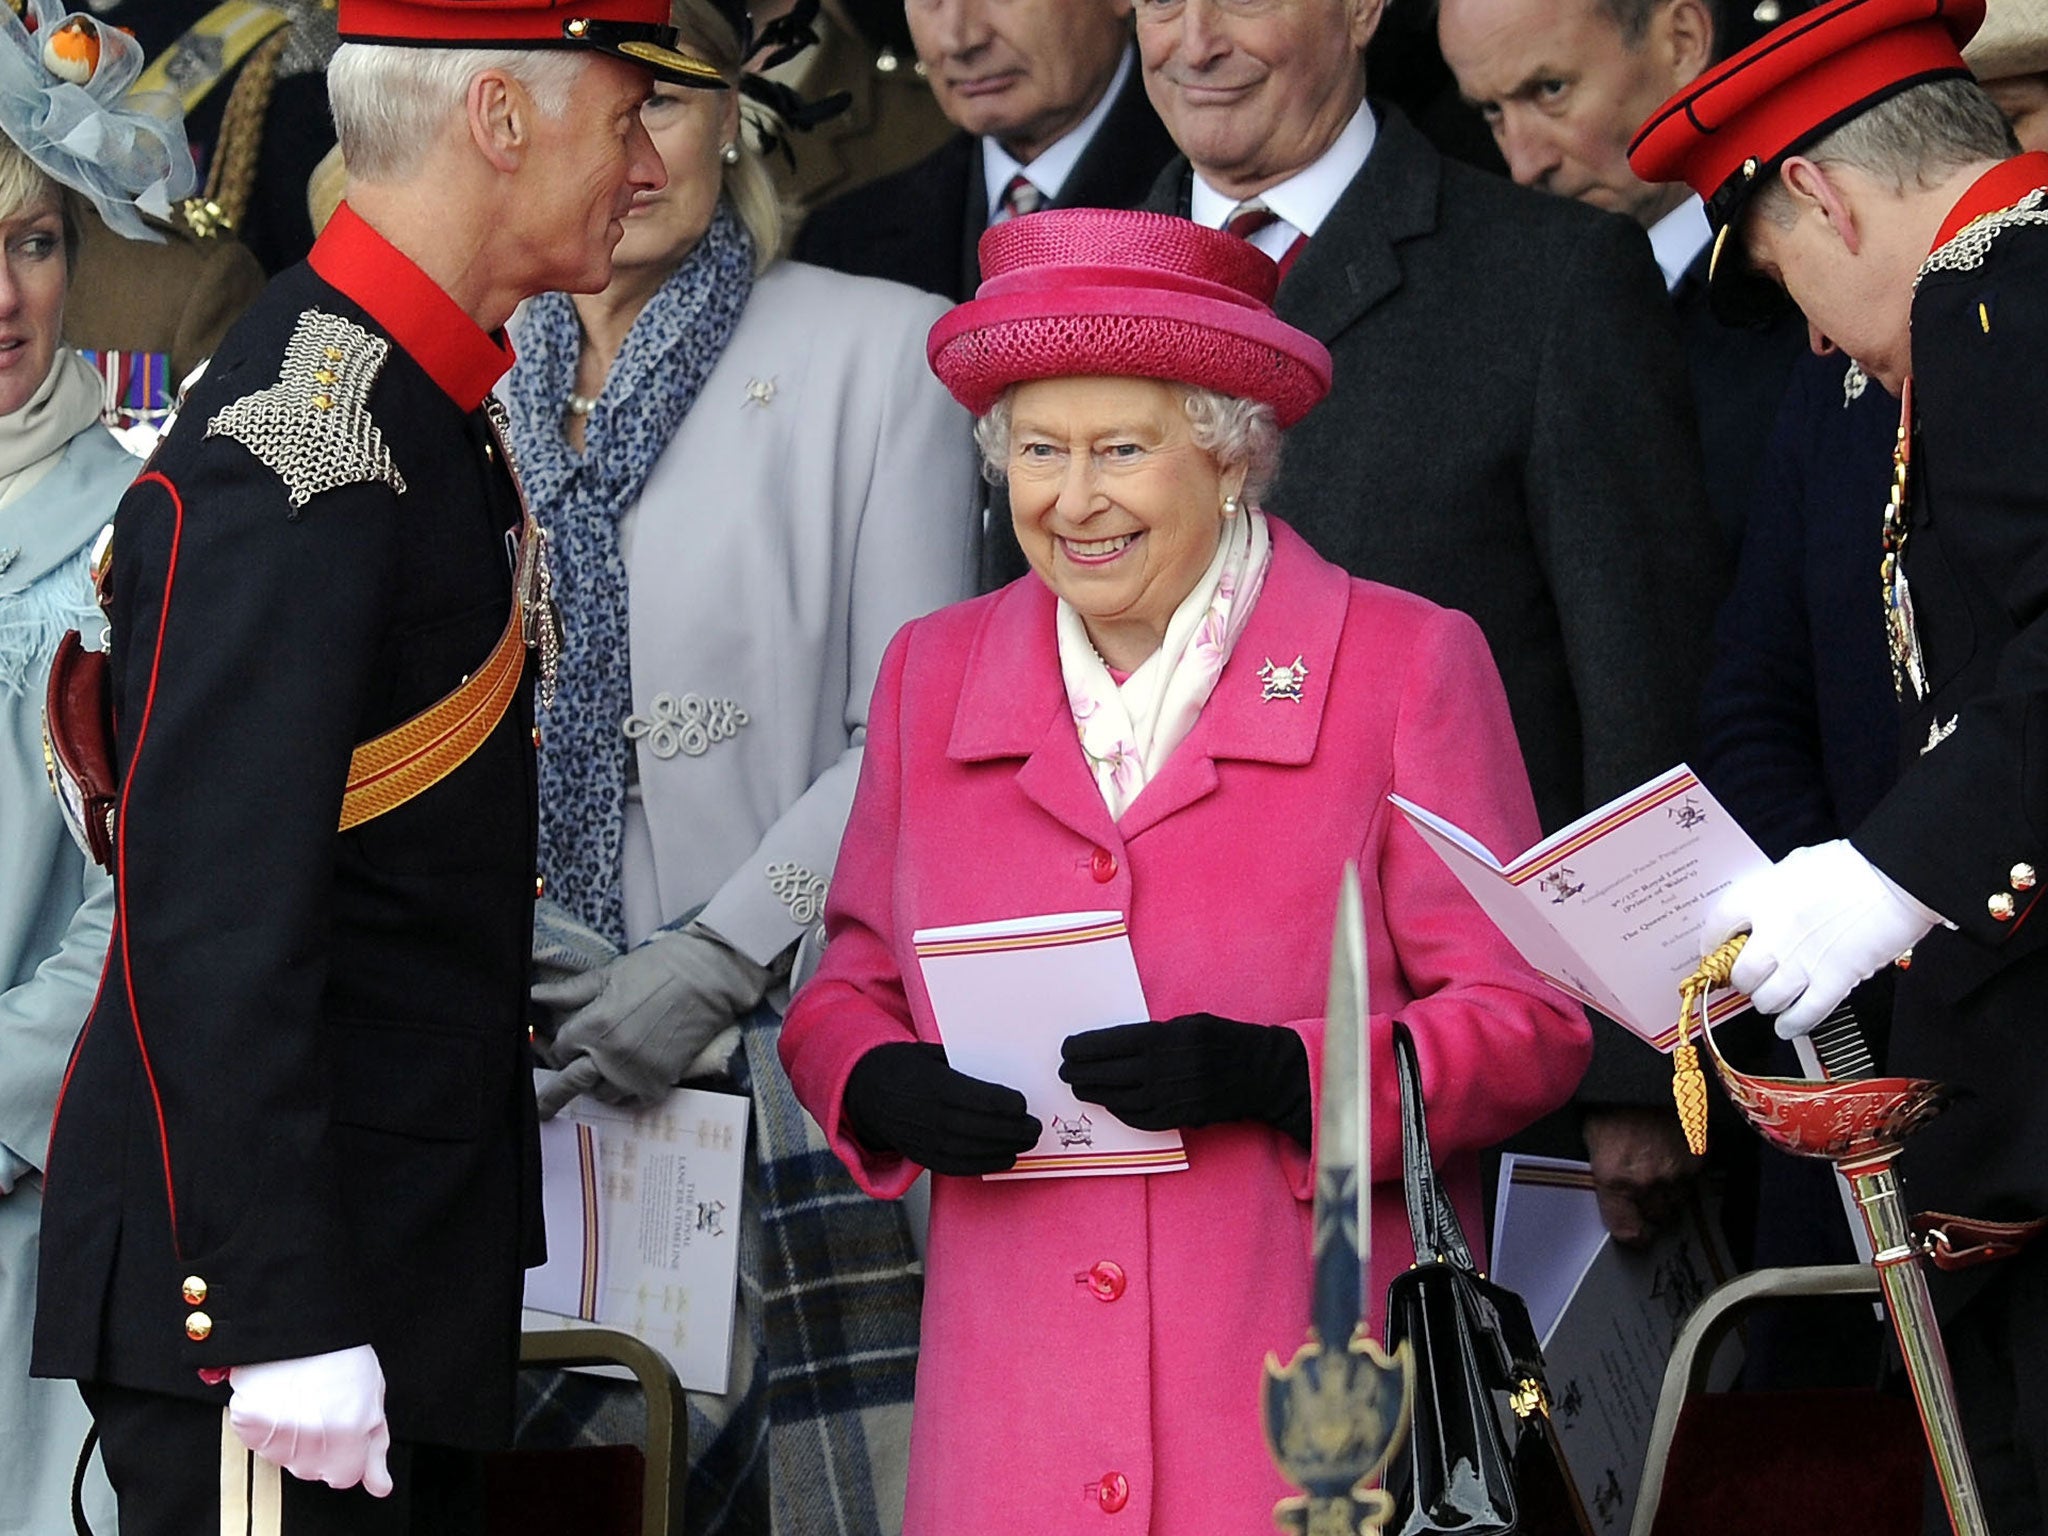 Britain's Queen Elizabeth II smiles during a visit to Richmond Castle to attend the amalgamation parade of The Queen's Royal Lancers and 9th/12th Royal Lancers, in Richmond, England Saturday May 2, 2015